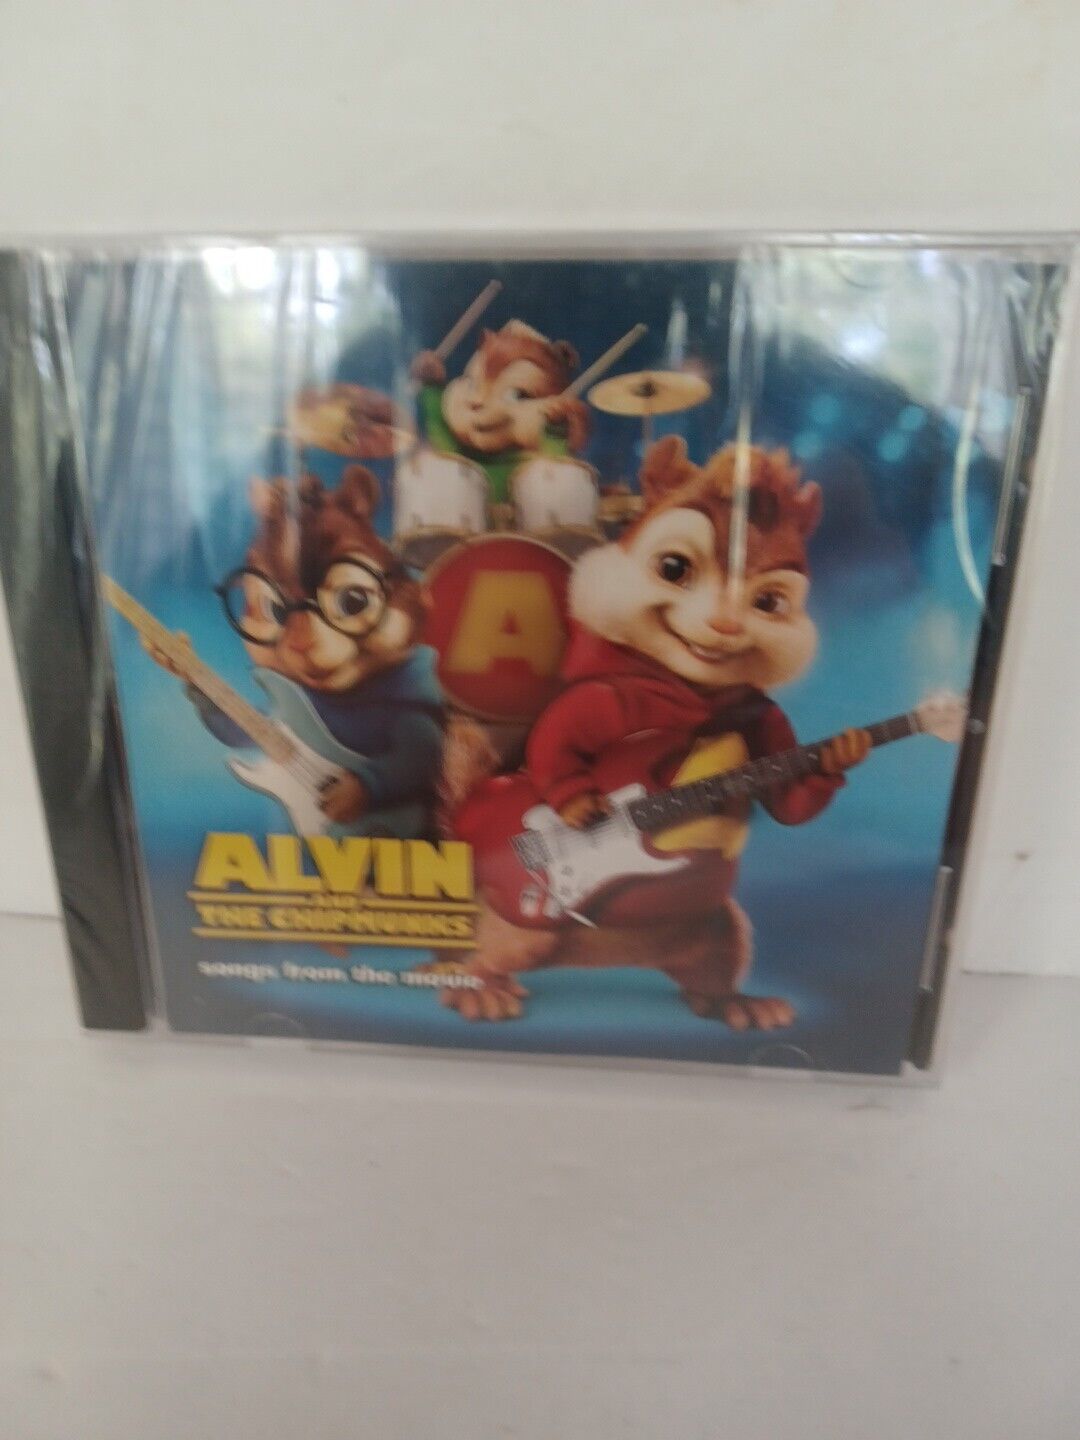 Alvin And The Chipmunks Songs From The Movie Soundtrack Music CD 2007 SEALED NEW